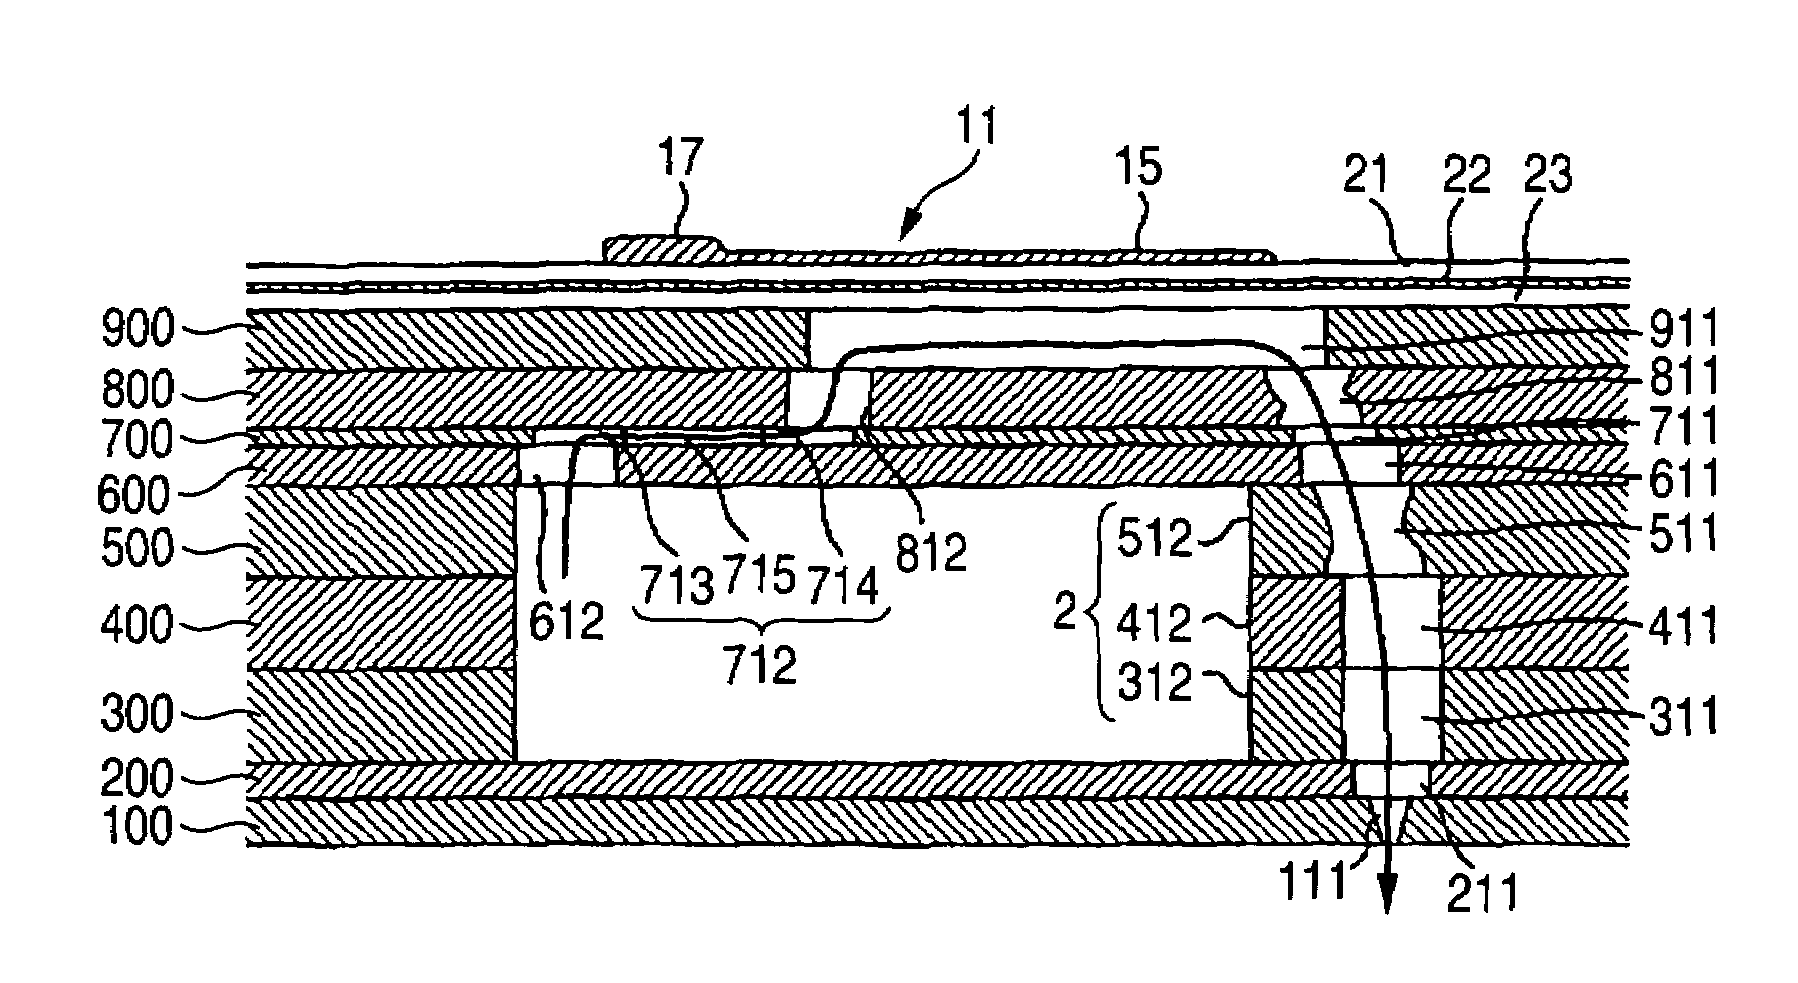 Ink-jet printer, ink-jet head and method of manufacturing the ink-jet head